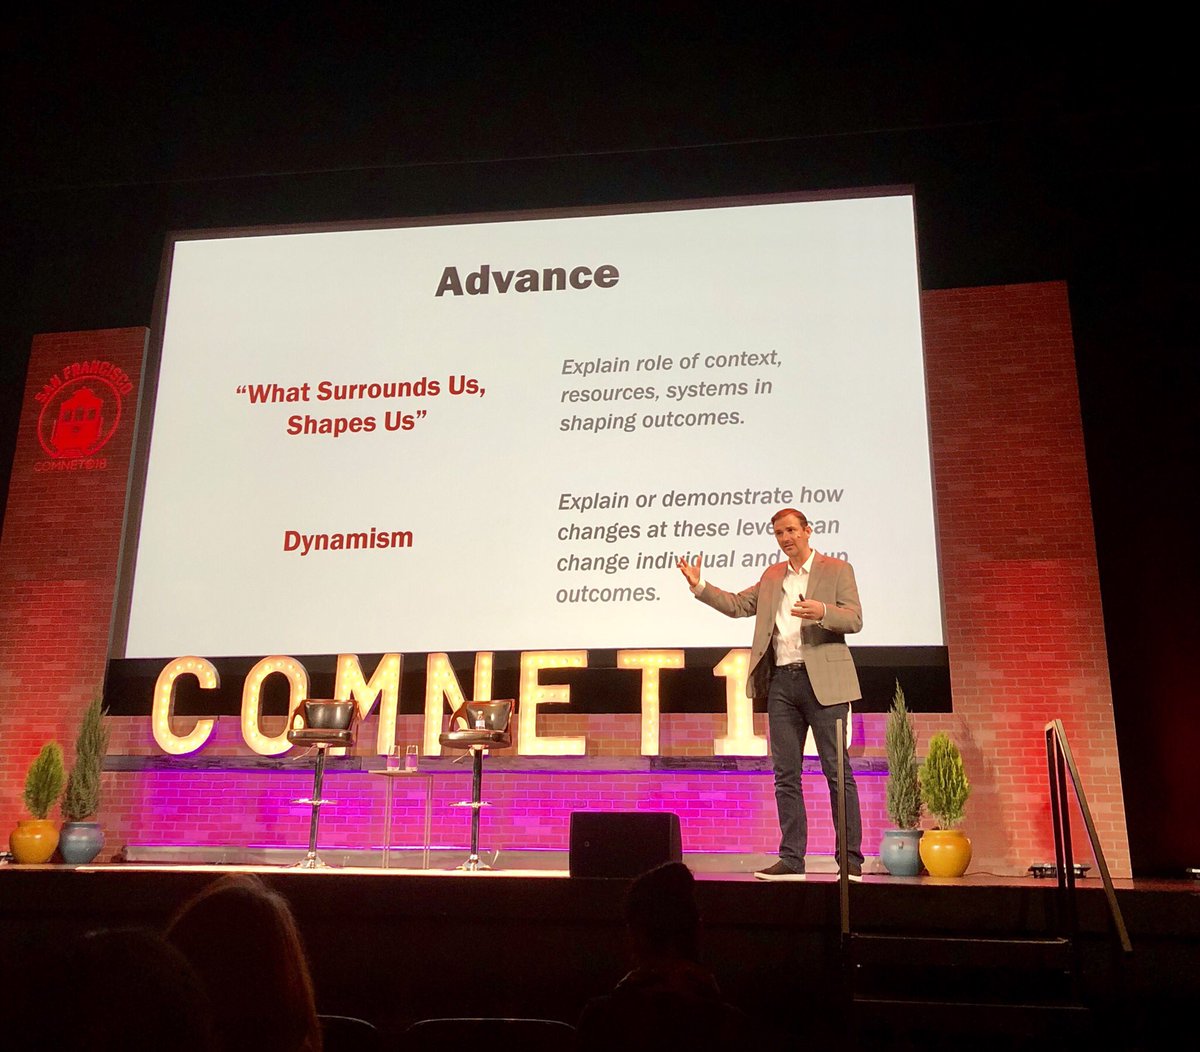 A great session led by @natkendallt & @shaunadamec about research on ingrained cultural challenges and communication strategies to break through and enable change. Pertinent to all comms and #authenticcontent strategies. @HistoryFactory #ComNet18